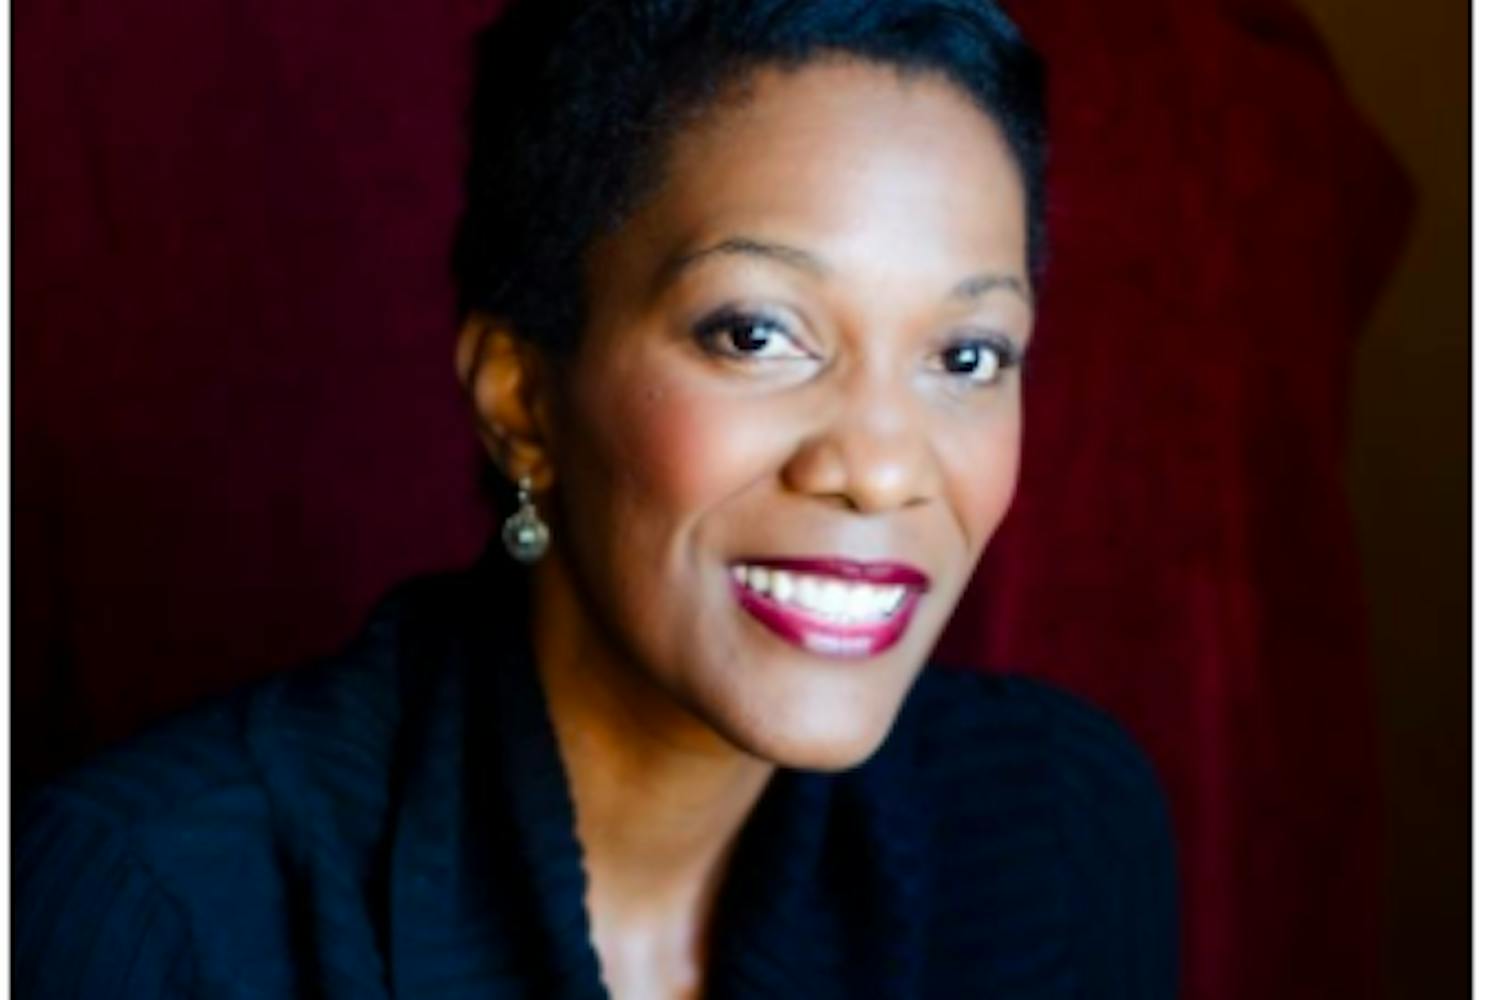 Writer and ASU alum Yvette Johnson tackles&nbsp;racism by trying to understand bias in the human brain. Her memoir "The Song and The Silence" was released in May. Photo courtesy of Yvette Johnson.